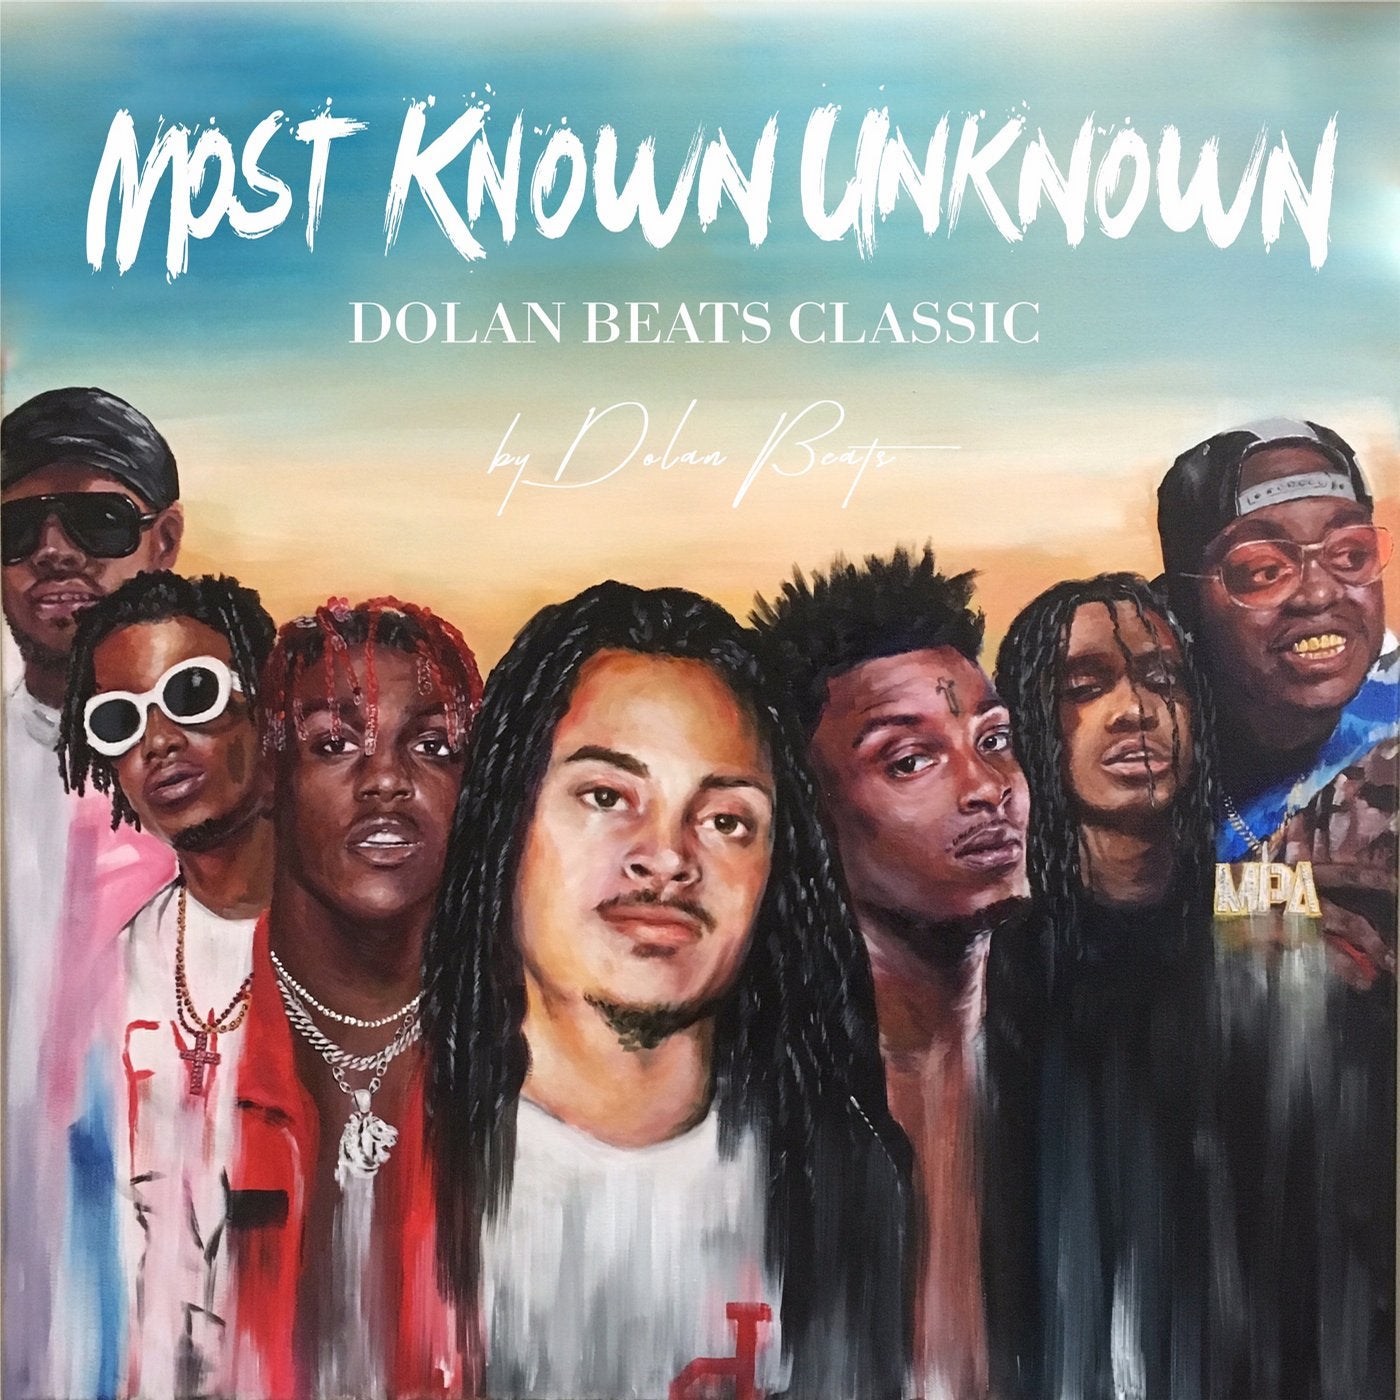 Most Known Unknown (Dolan Beats Classic)